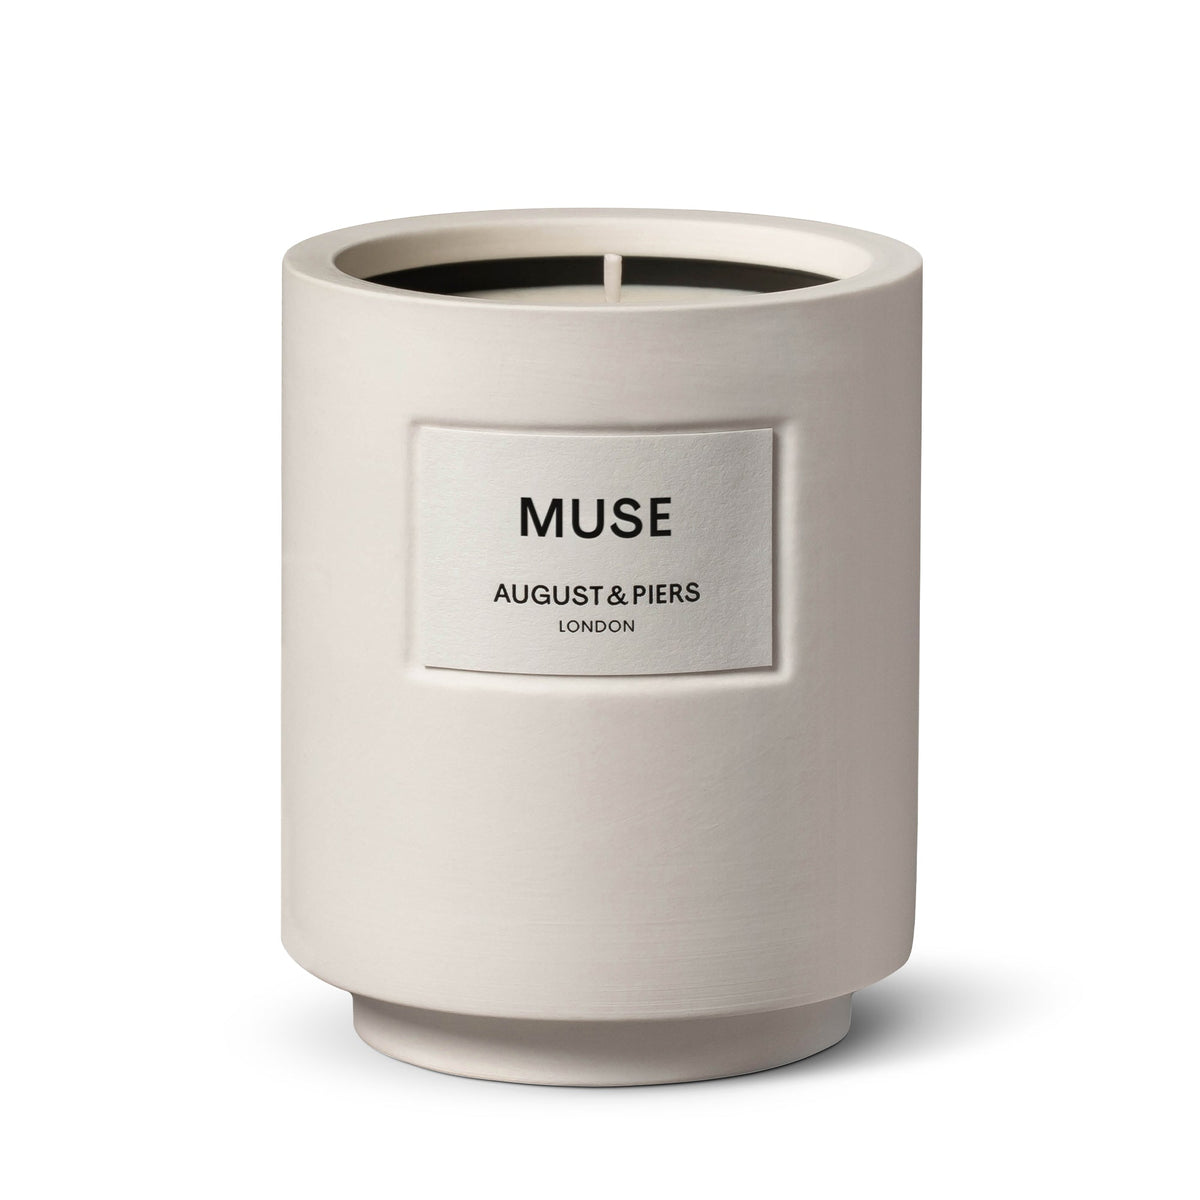 August & Piers Muse Scented Candle